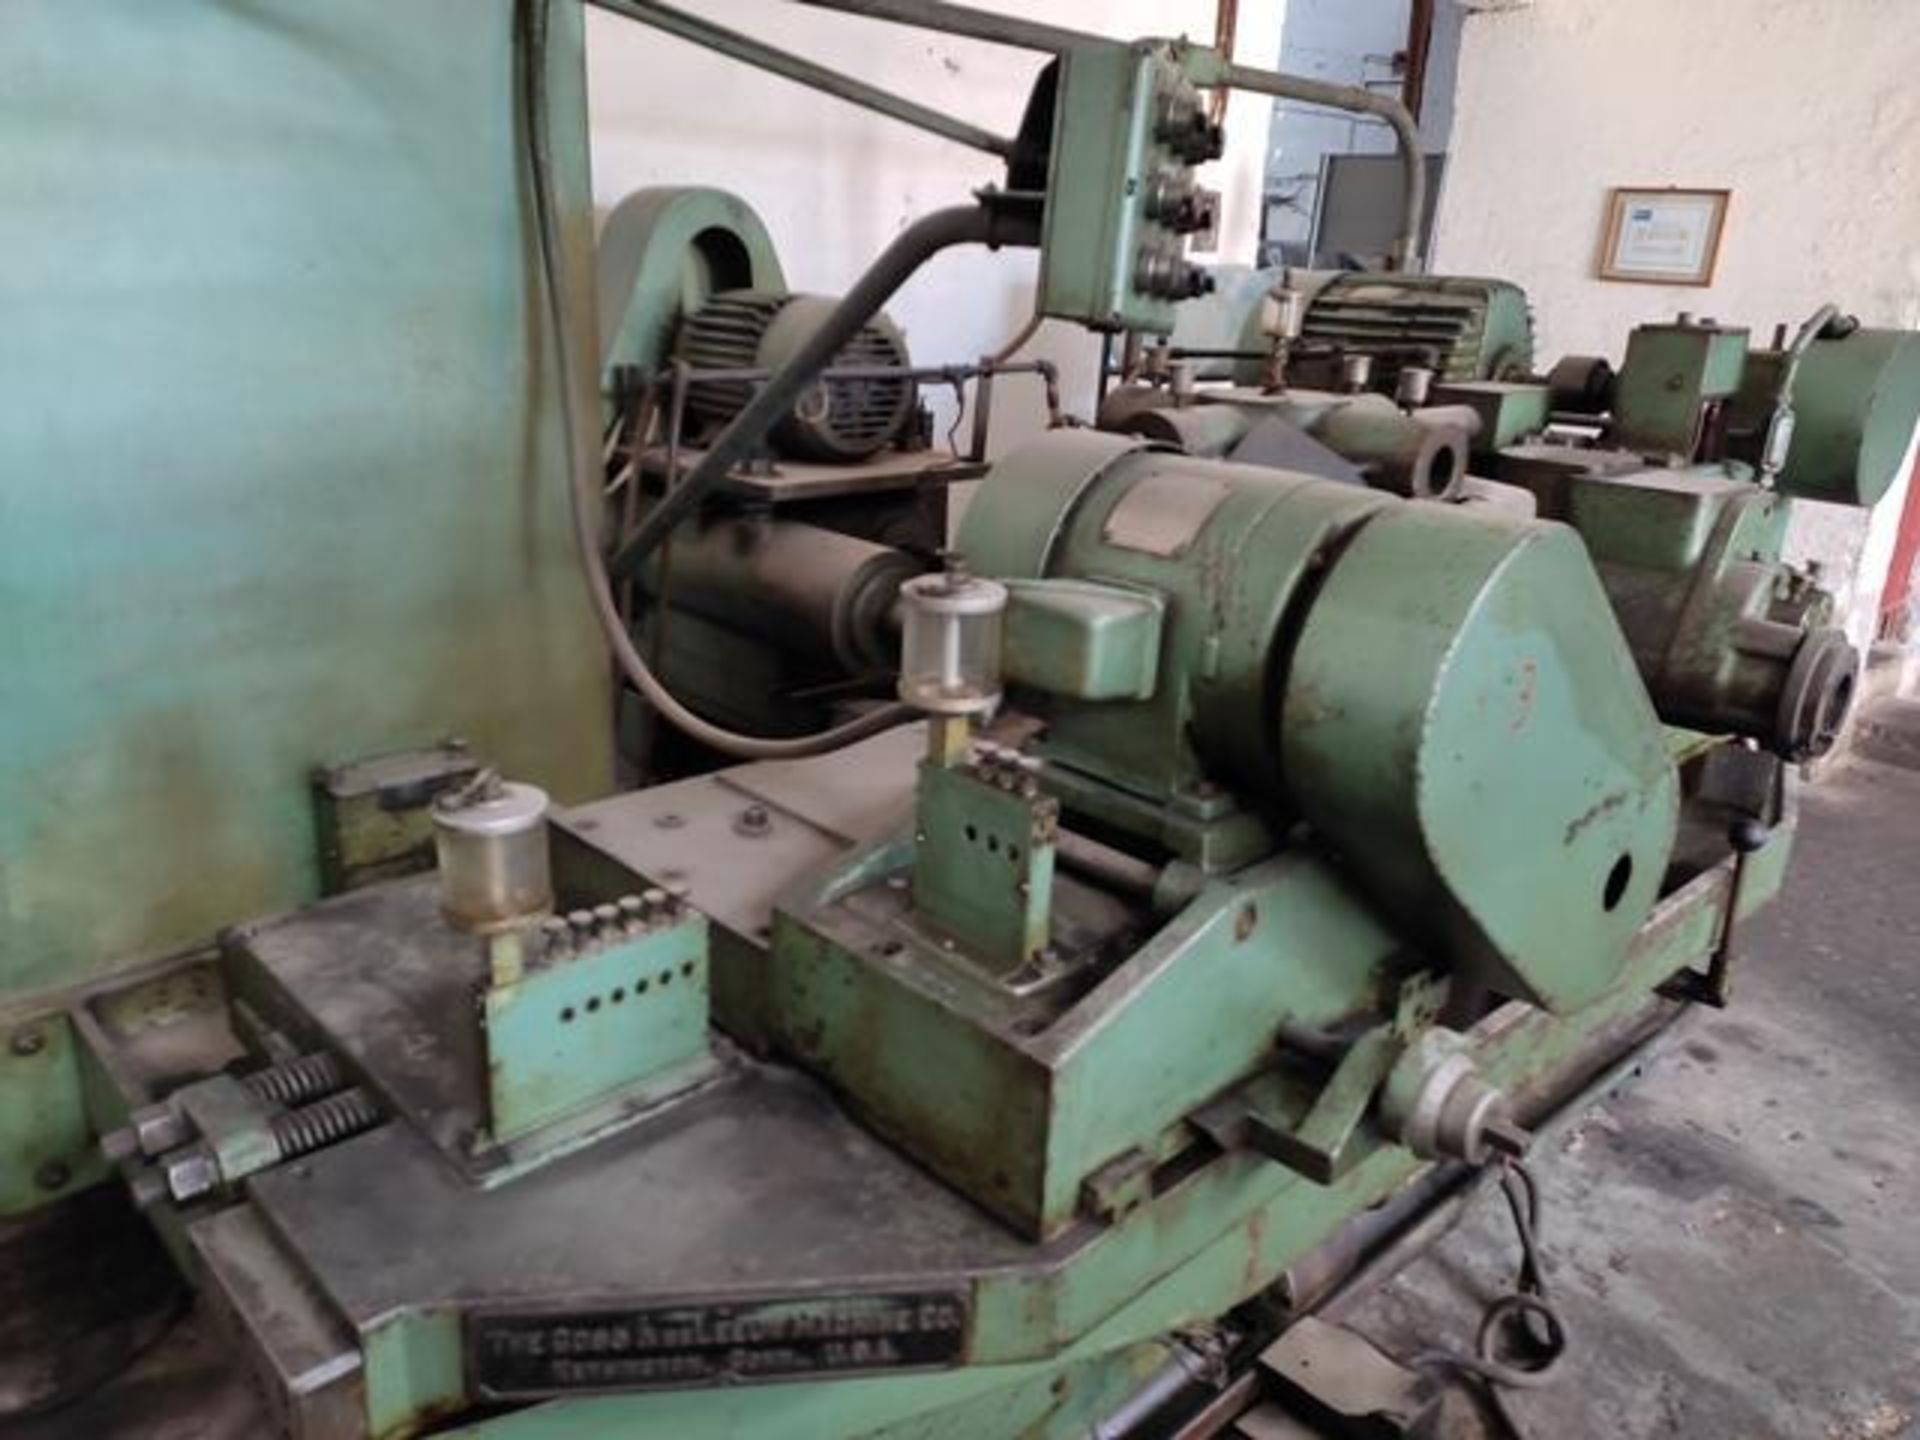 Goss 1-2-3 Chucking Machine, Serial: 2317: 7 Spindle, 3-1/2” Diameter, 4 Chucking Positions with - Image 8 of 26